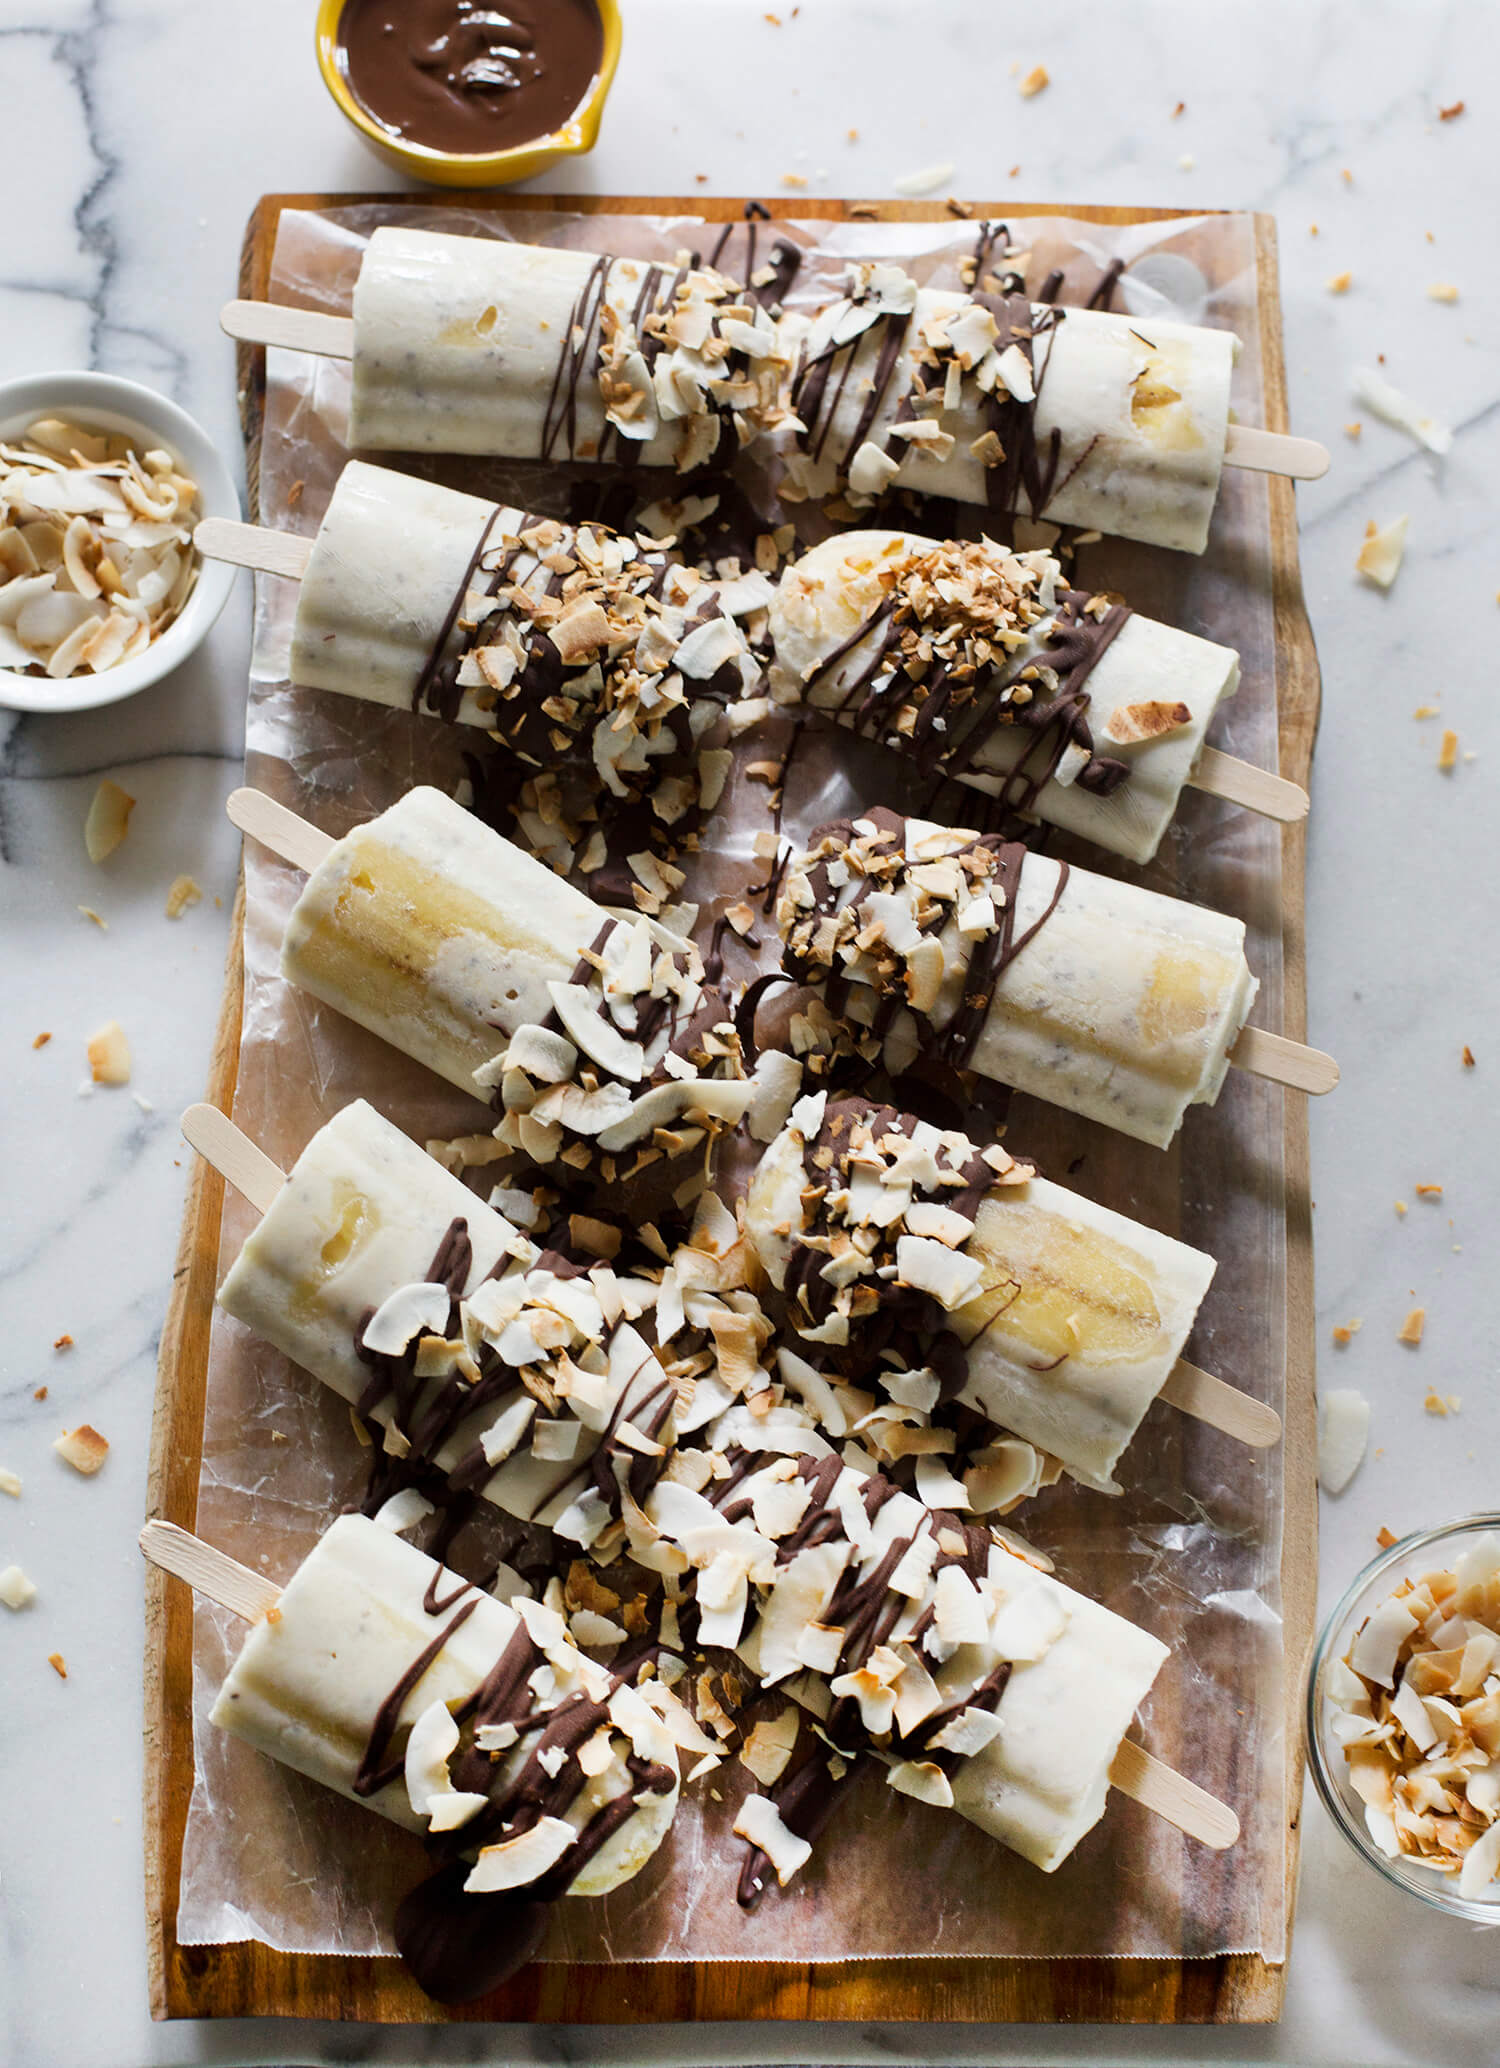 How to make coconut banana chocolate popsicles